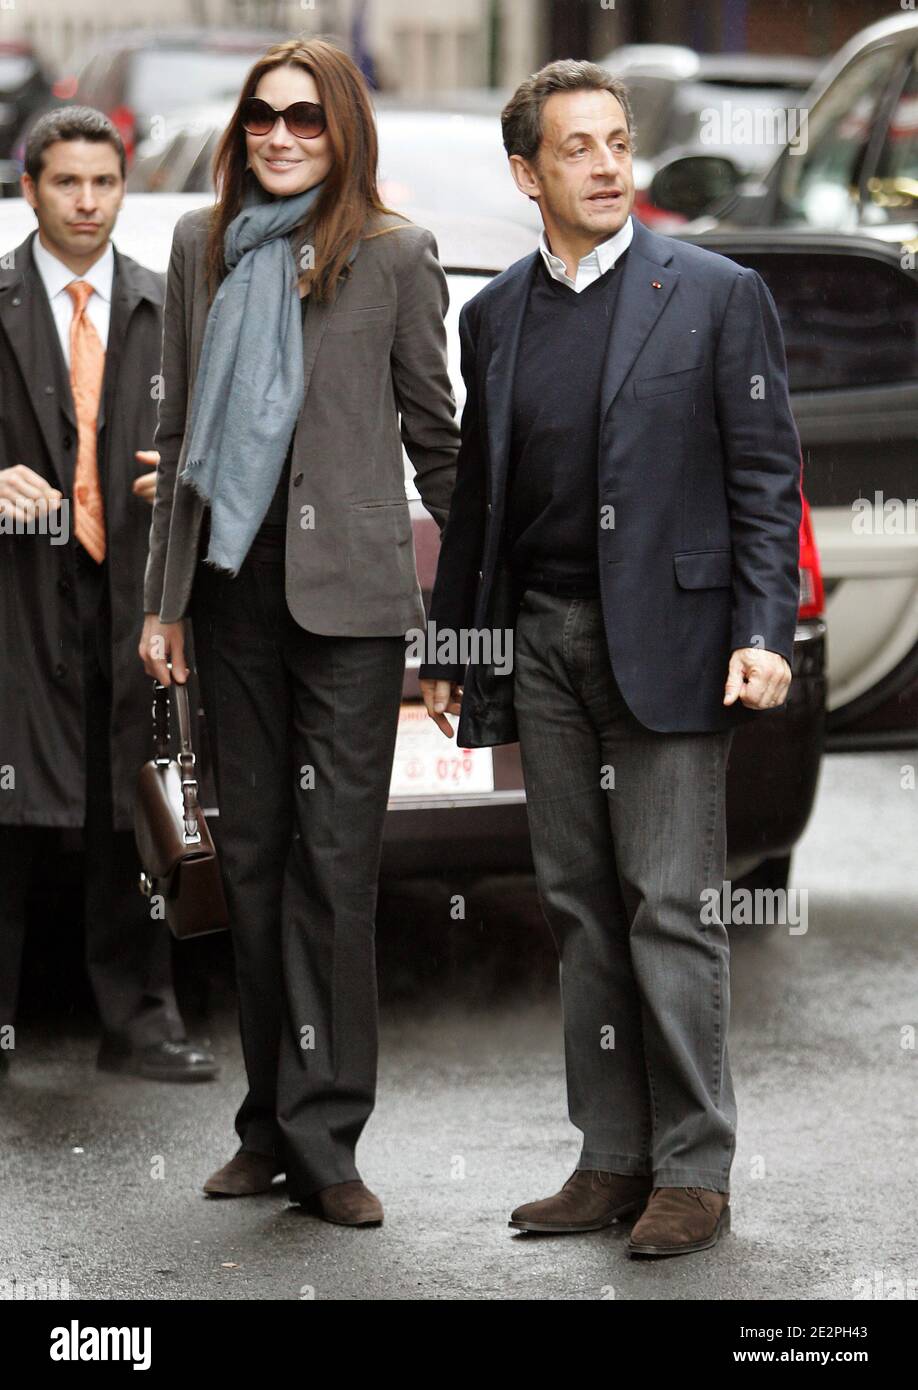 French President Nicolas Sarkozy and his wife Carla Bruni Sarkozy are seen arriving at their hotel in New York City, NY on March 28, 2010. Photo by Guerin-Taamallah/ABACAPRESS.COM Stock Photo